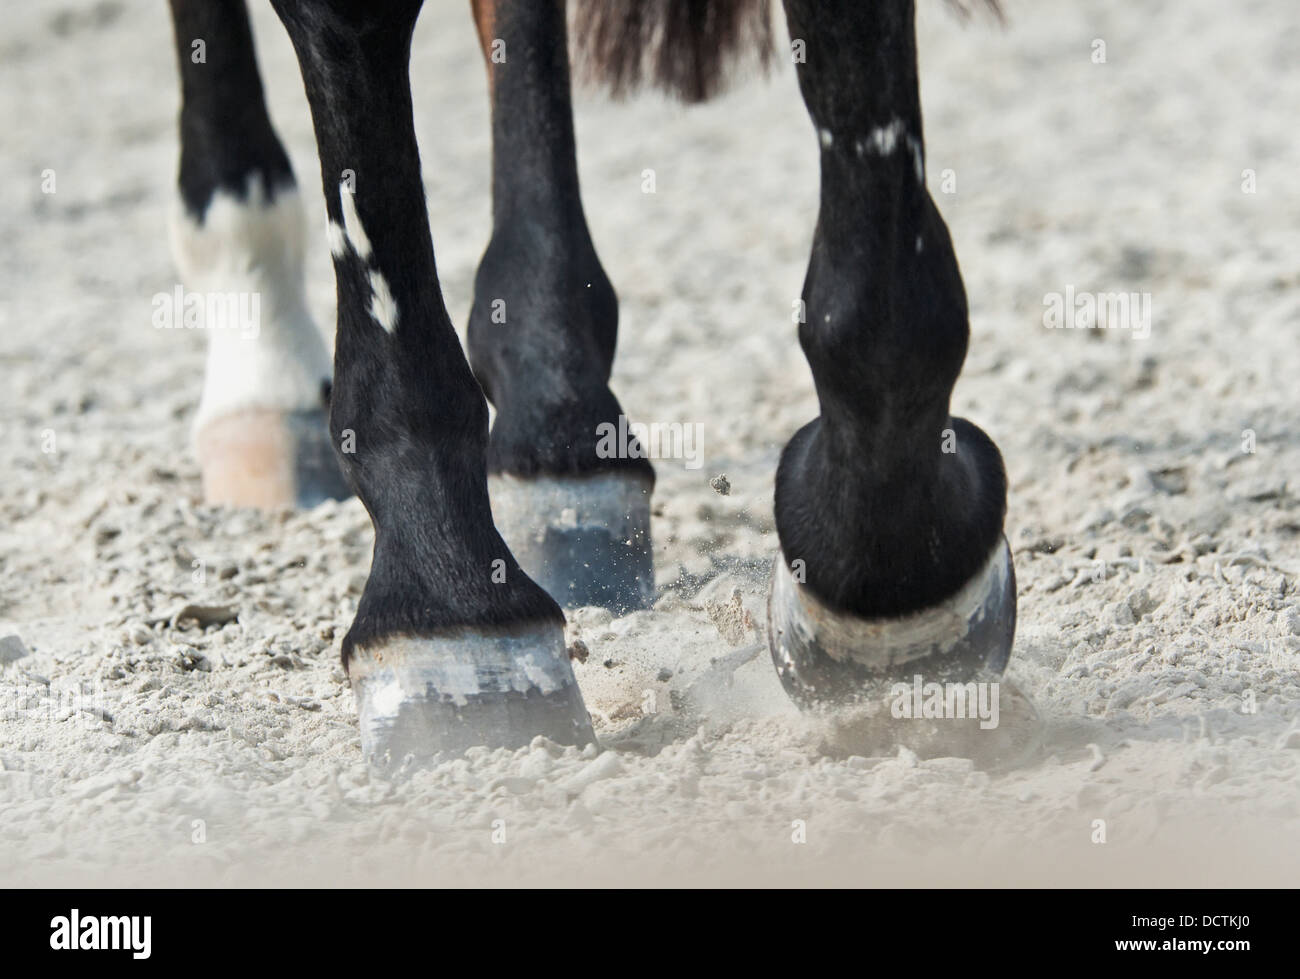 Horse Hooves Running On The Ground; Benalamadena Costa, Malaga, Costa Del Sol, Andalusia, Spain Stock Photo